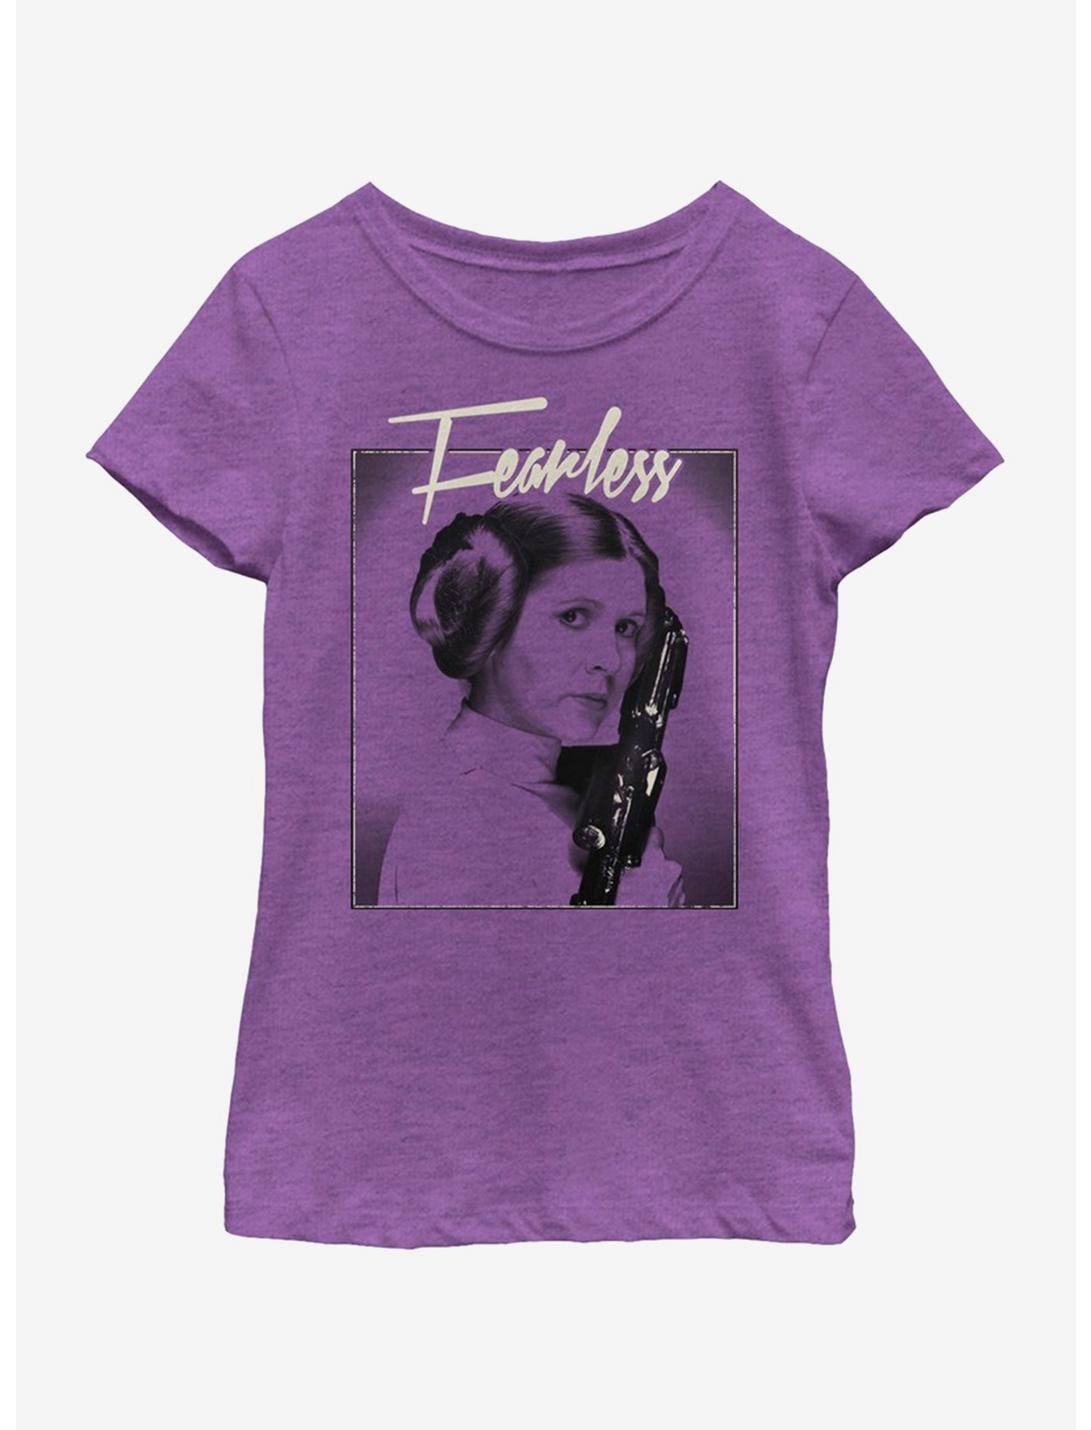 Star Wars Fearless Youth Girls T-Shirt, PURPLE BERRY, hi-res